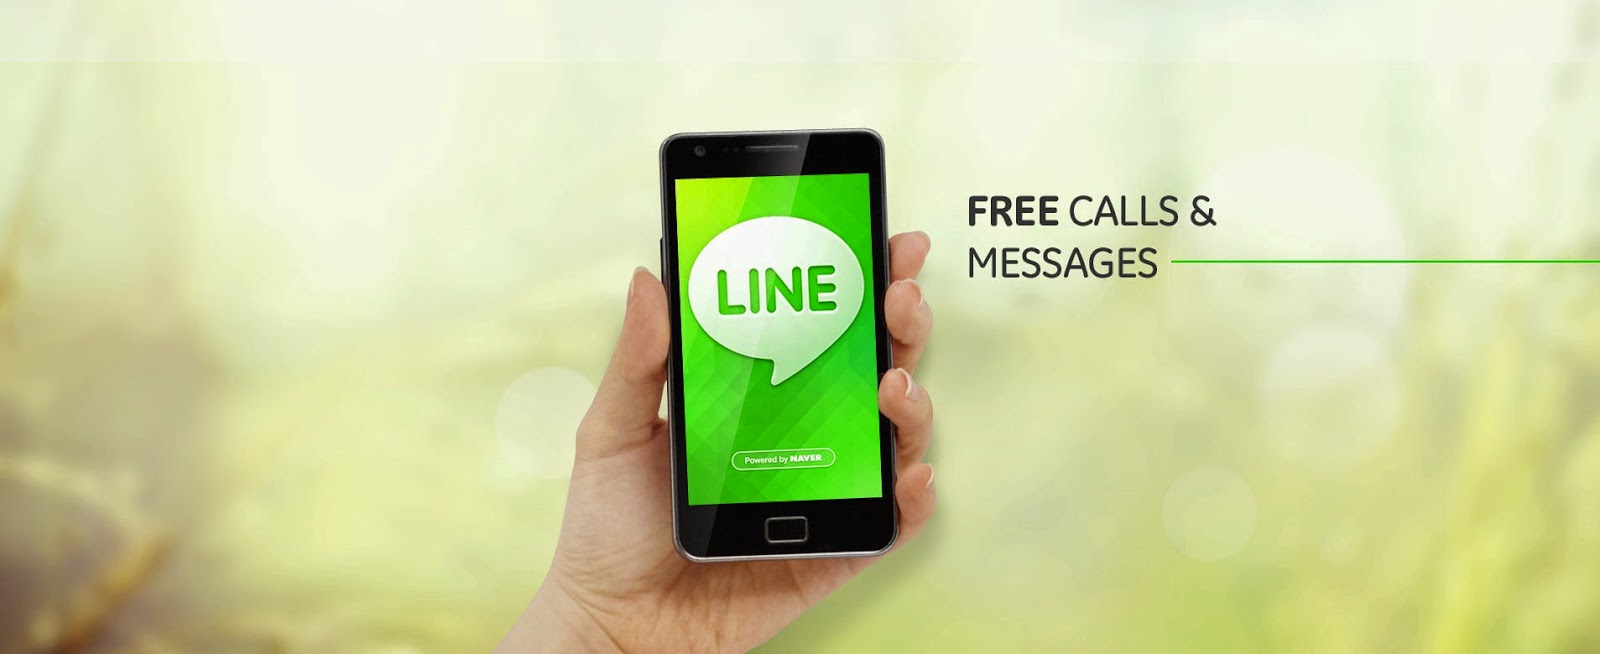 Free Calls and Messages with LINE android app for Mobiles and PC